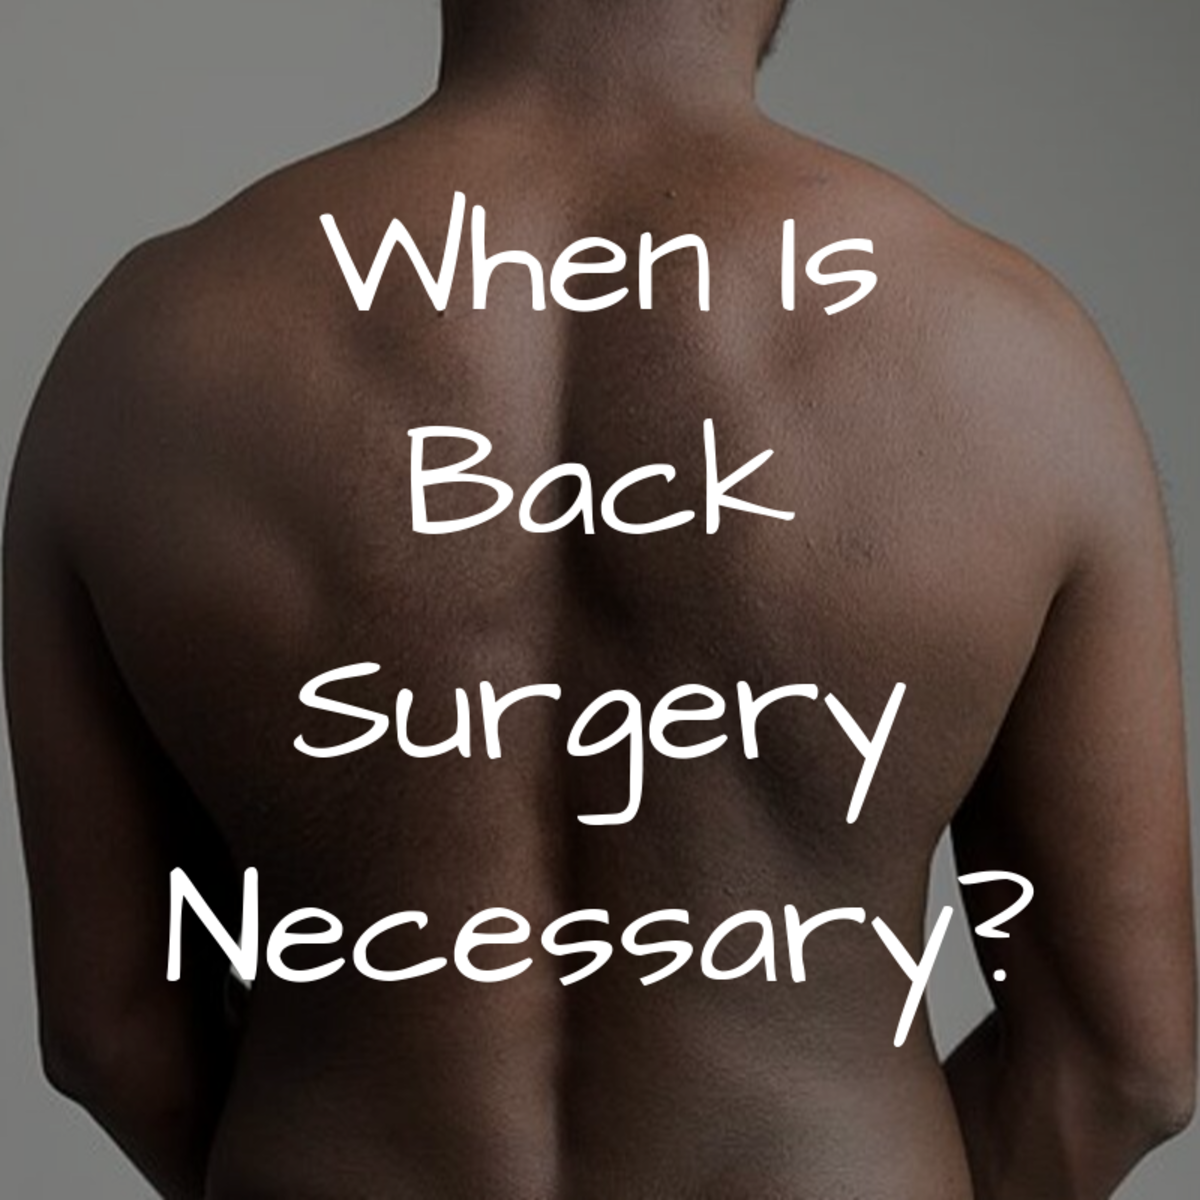 When other treatment options fail to relieve your back pain, or for certain pain conditions, surgery may be a good option.